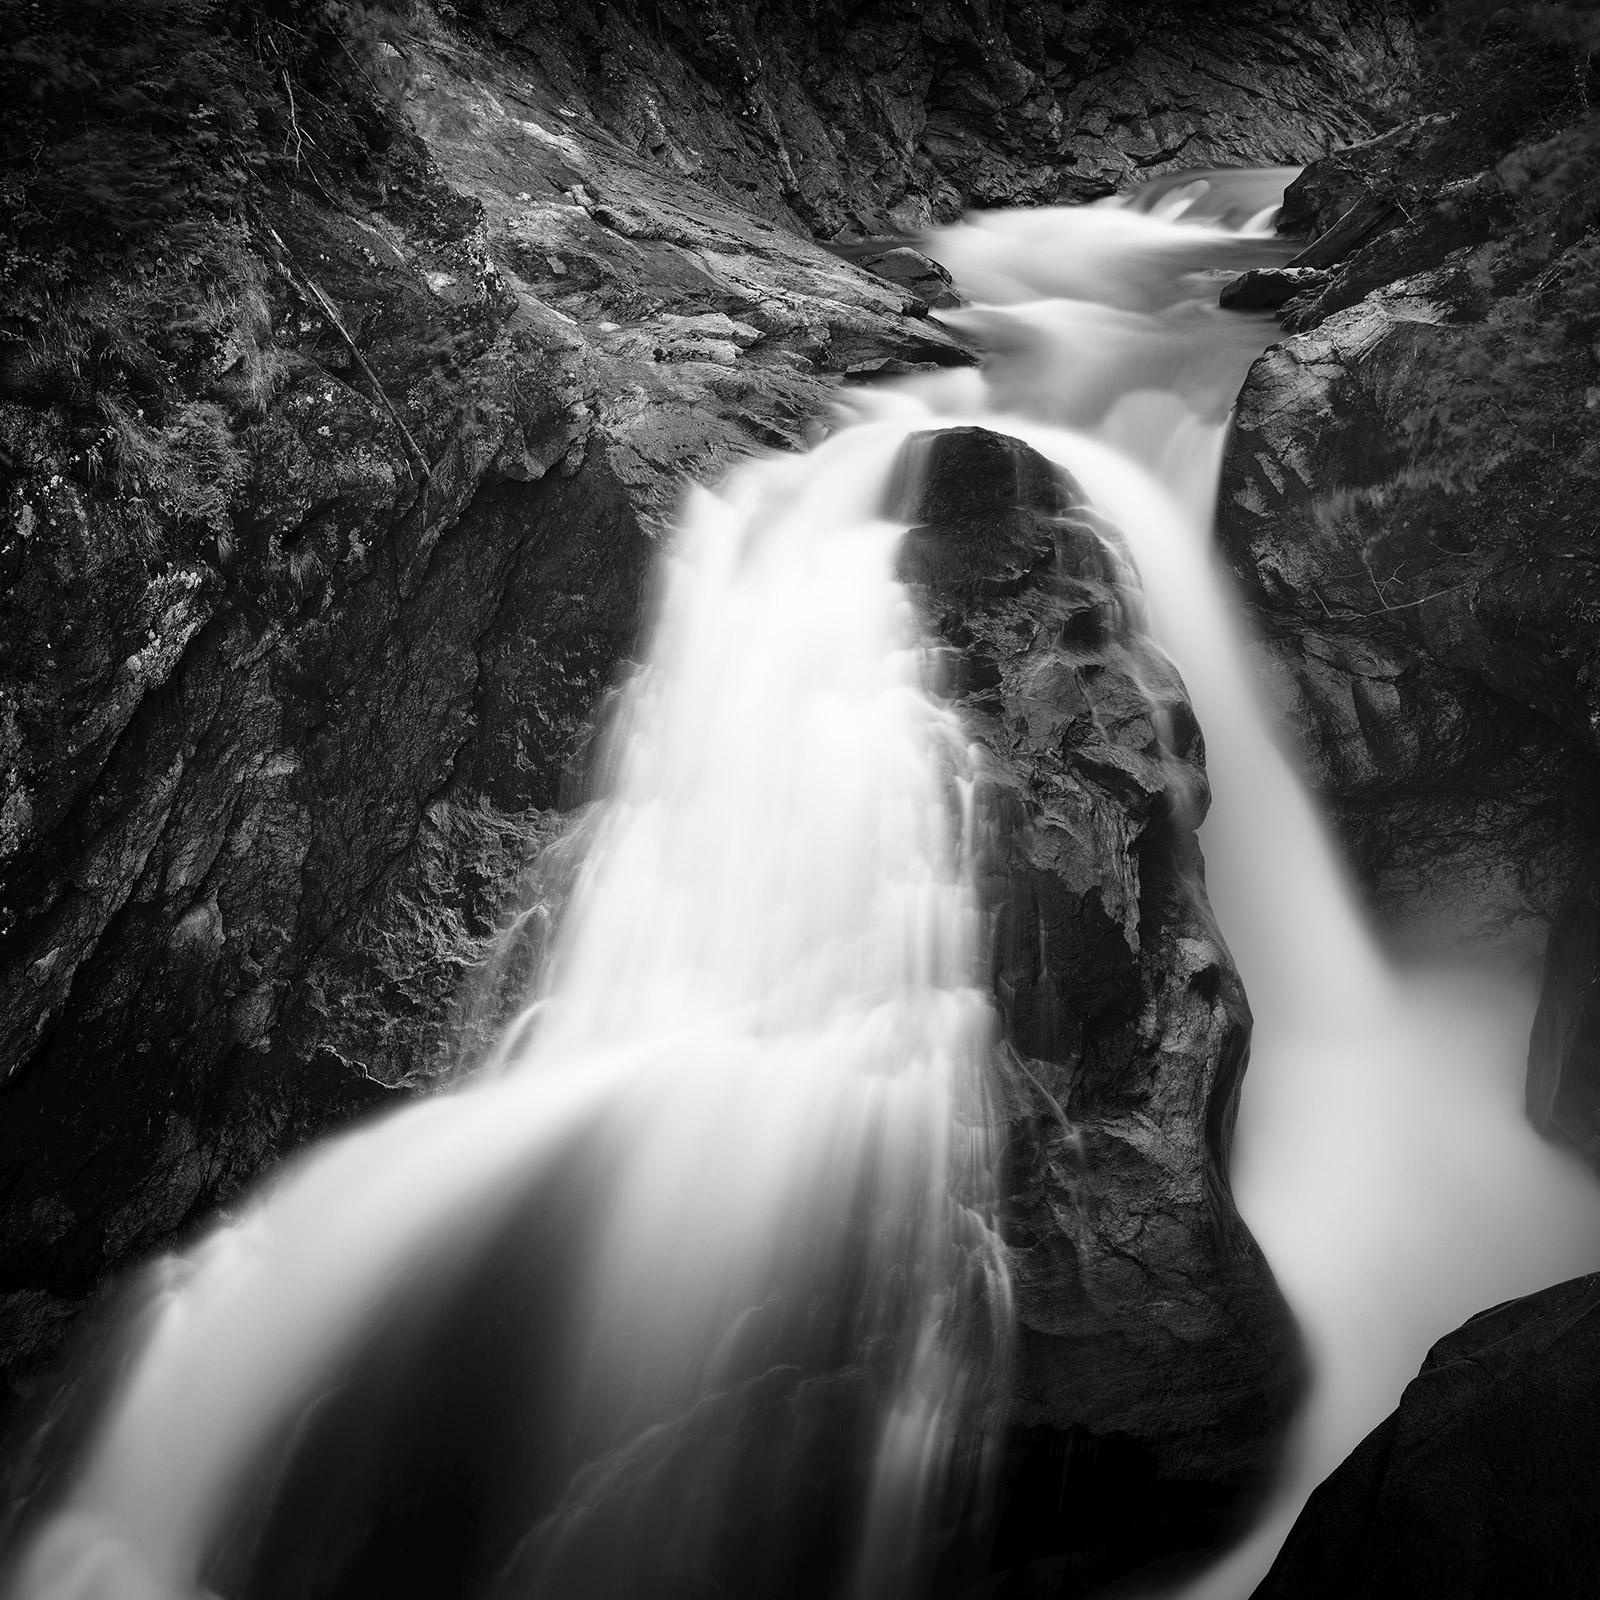 Gerald Berghammer Black and White Photograph - Krimmler Ache, waterfall, mountain river, black and white photography, landscape